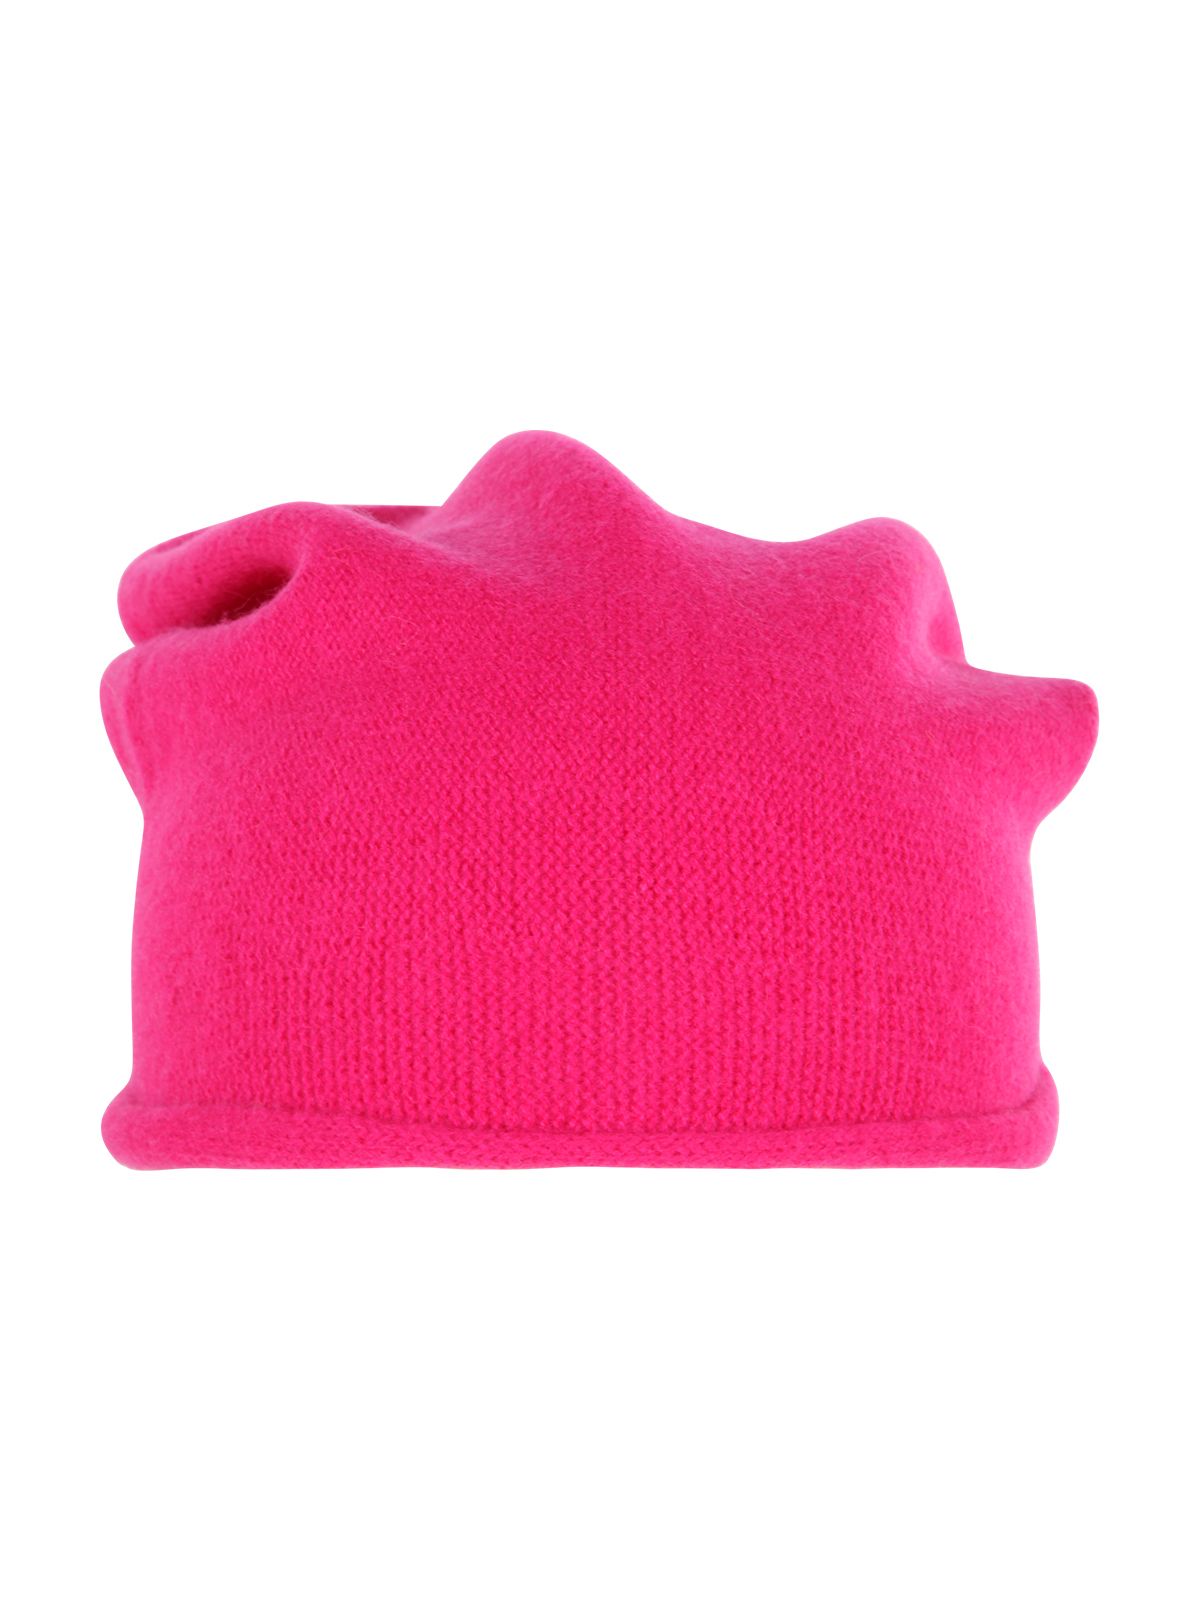 About Cashmere Beanie